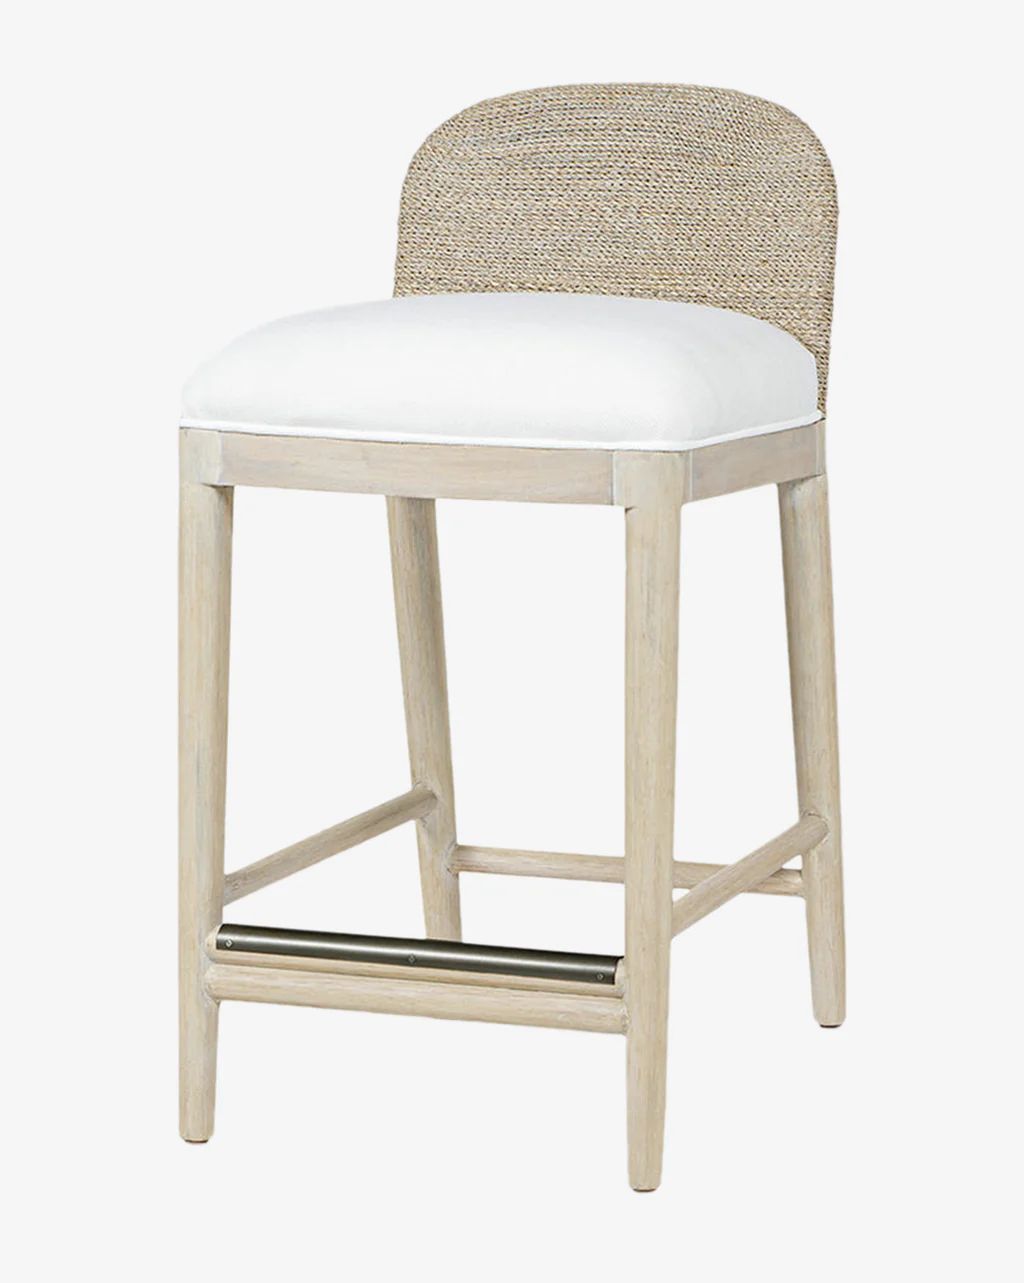 Rossi Stool | McGee & Co.